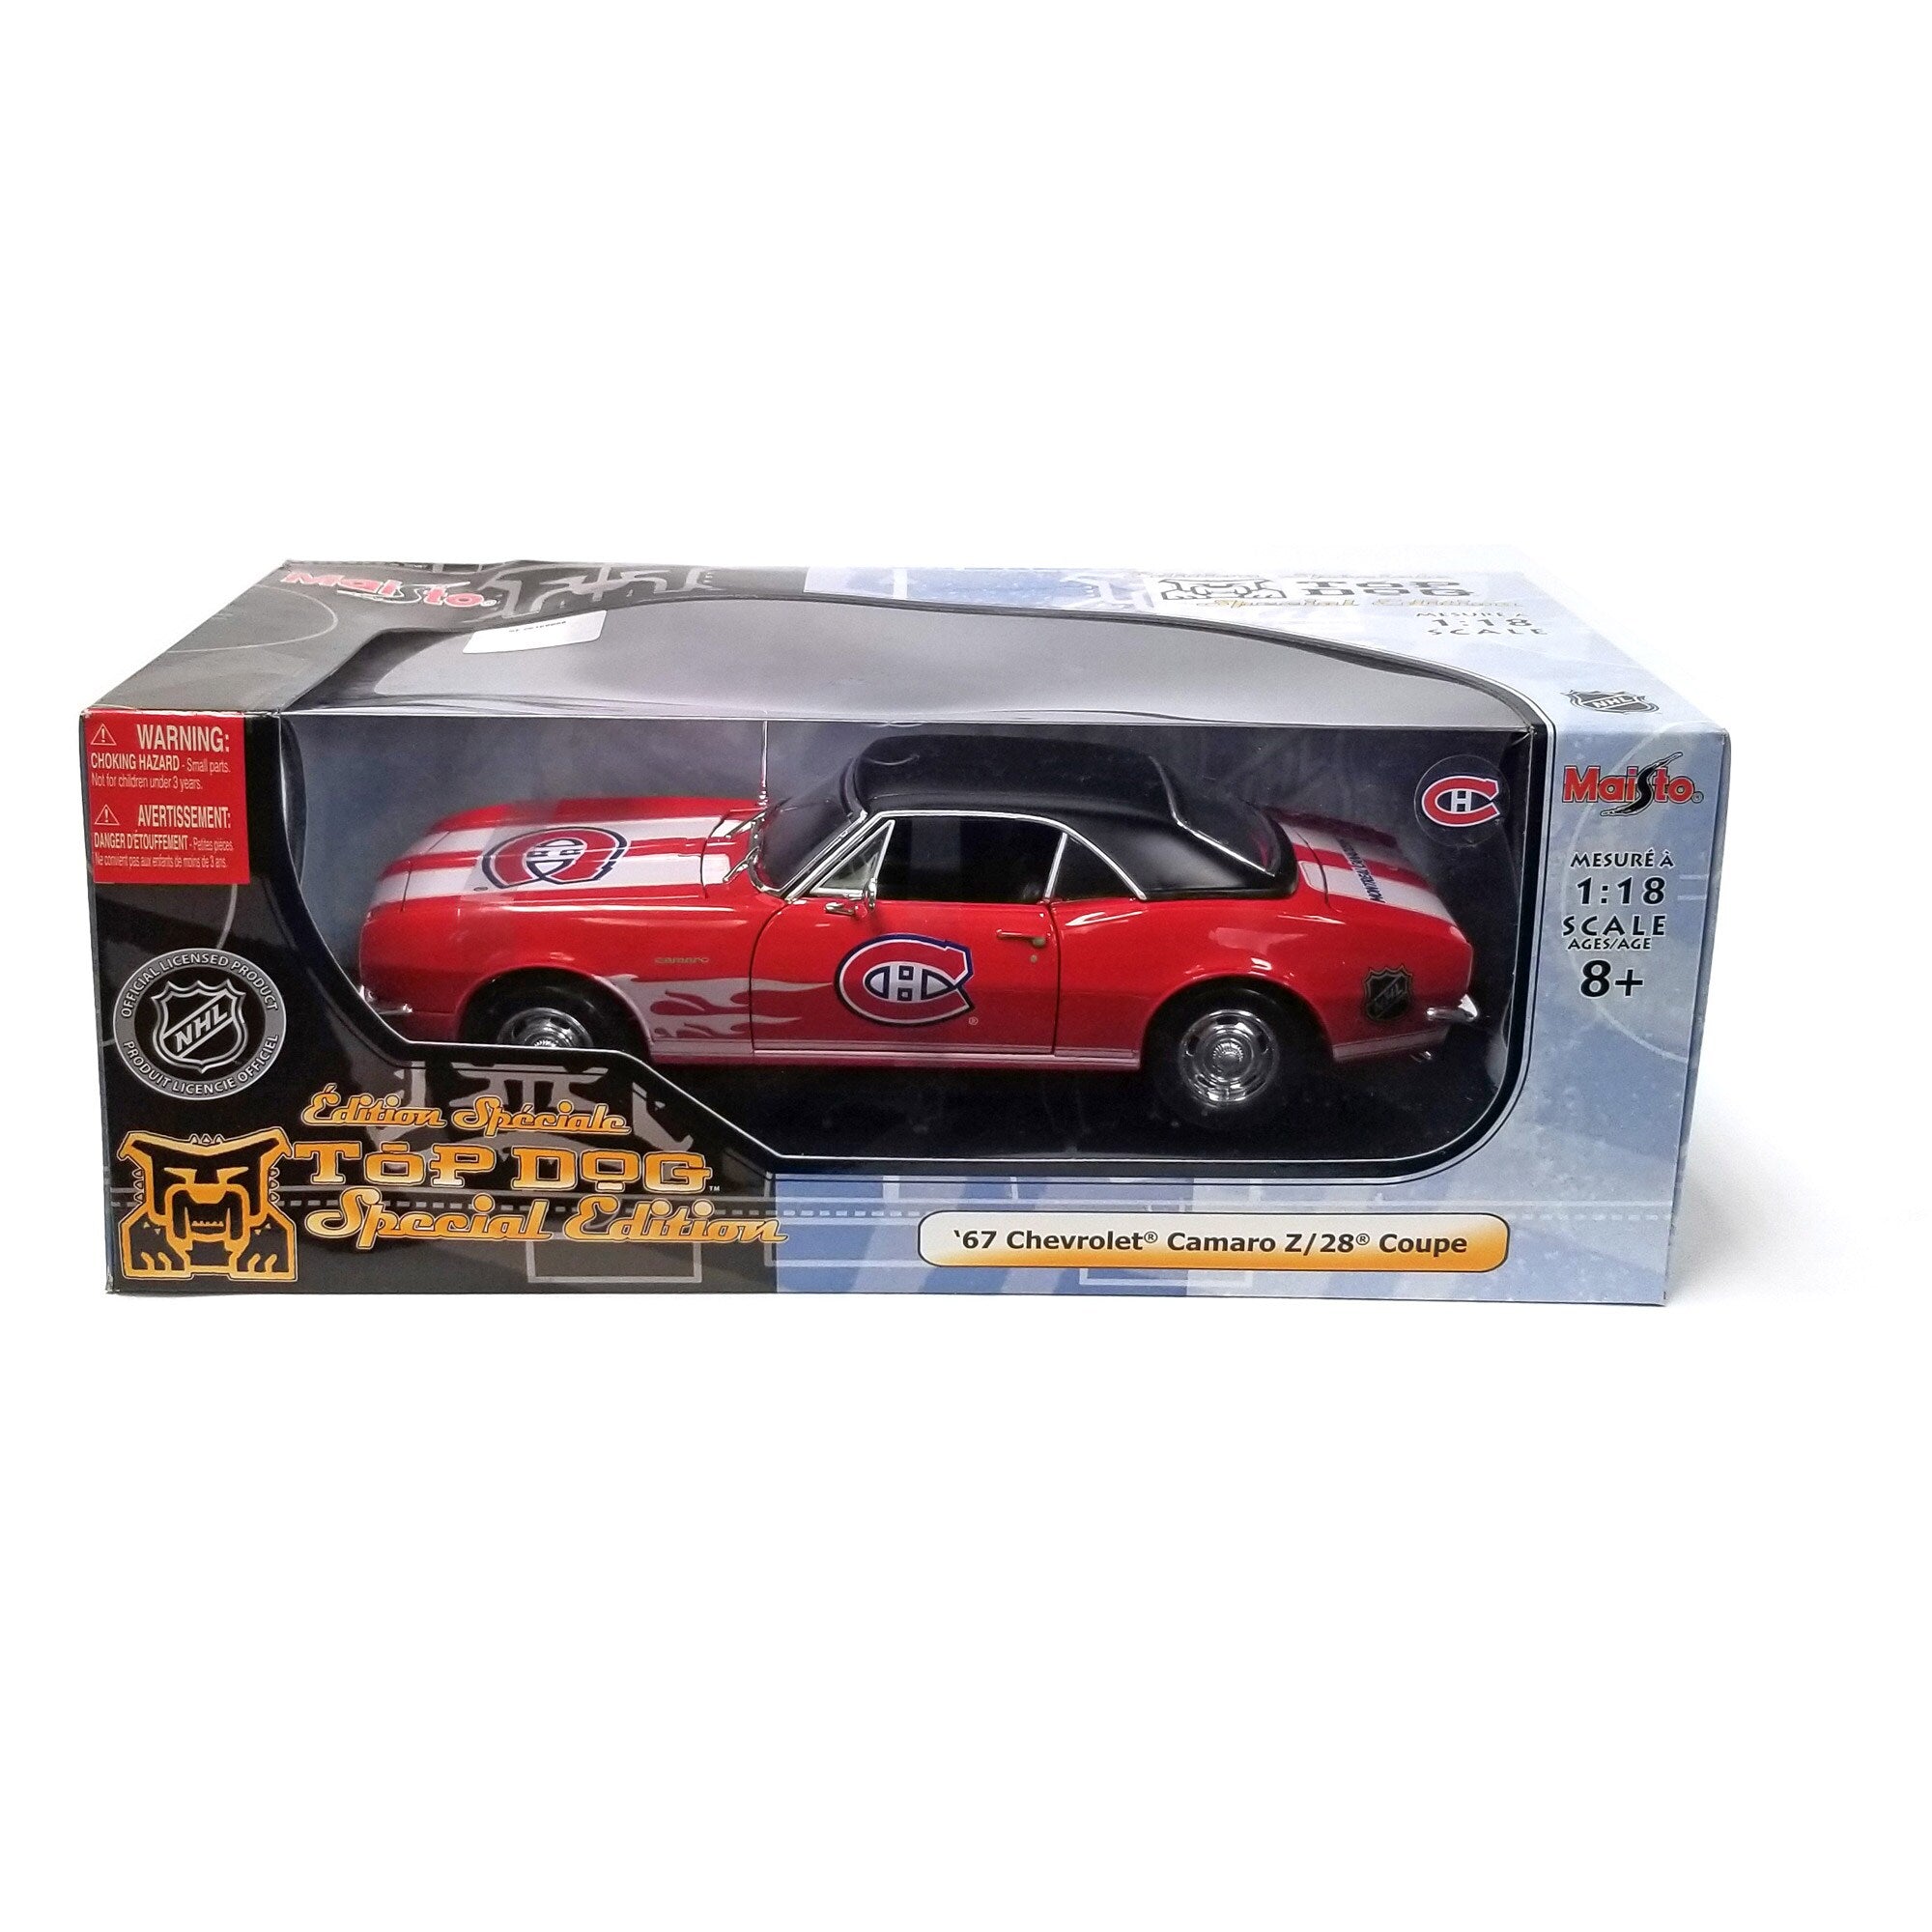 Diecast - Maisto - 1:18 Scale - 1967 Chevrolet Camaro Z/28 Coupe - NHL Montreal Canadiens - 0